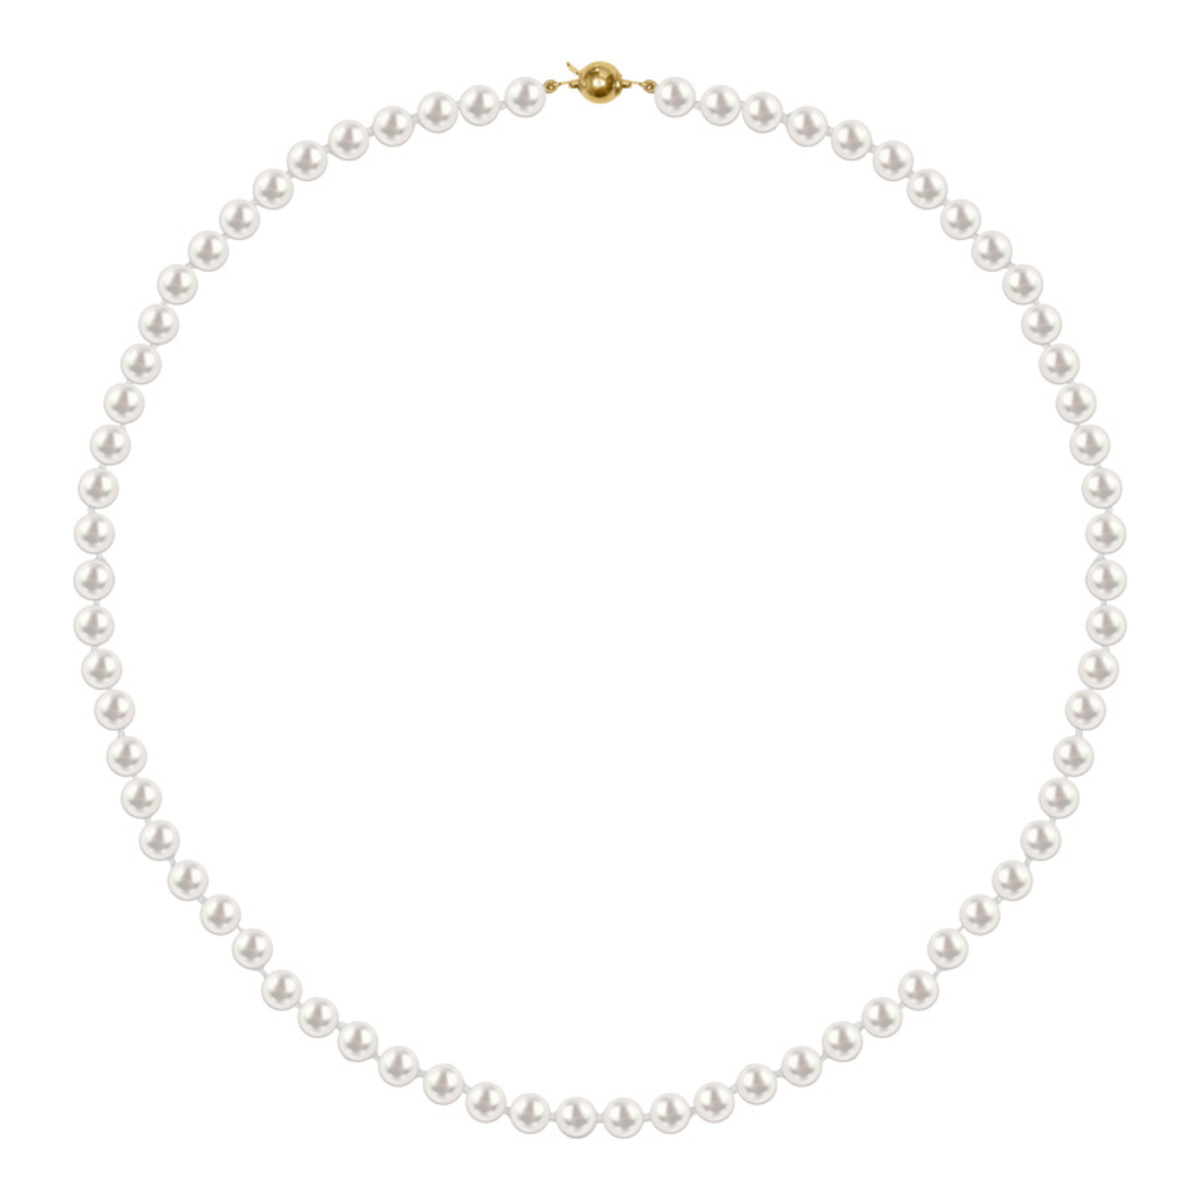 6.5-7mm Cultured Freshwater White Pearl Strand Necklace and 7-7.5mm Stud Earrings, 18ct Yellow Gold